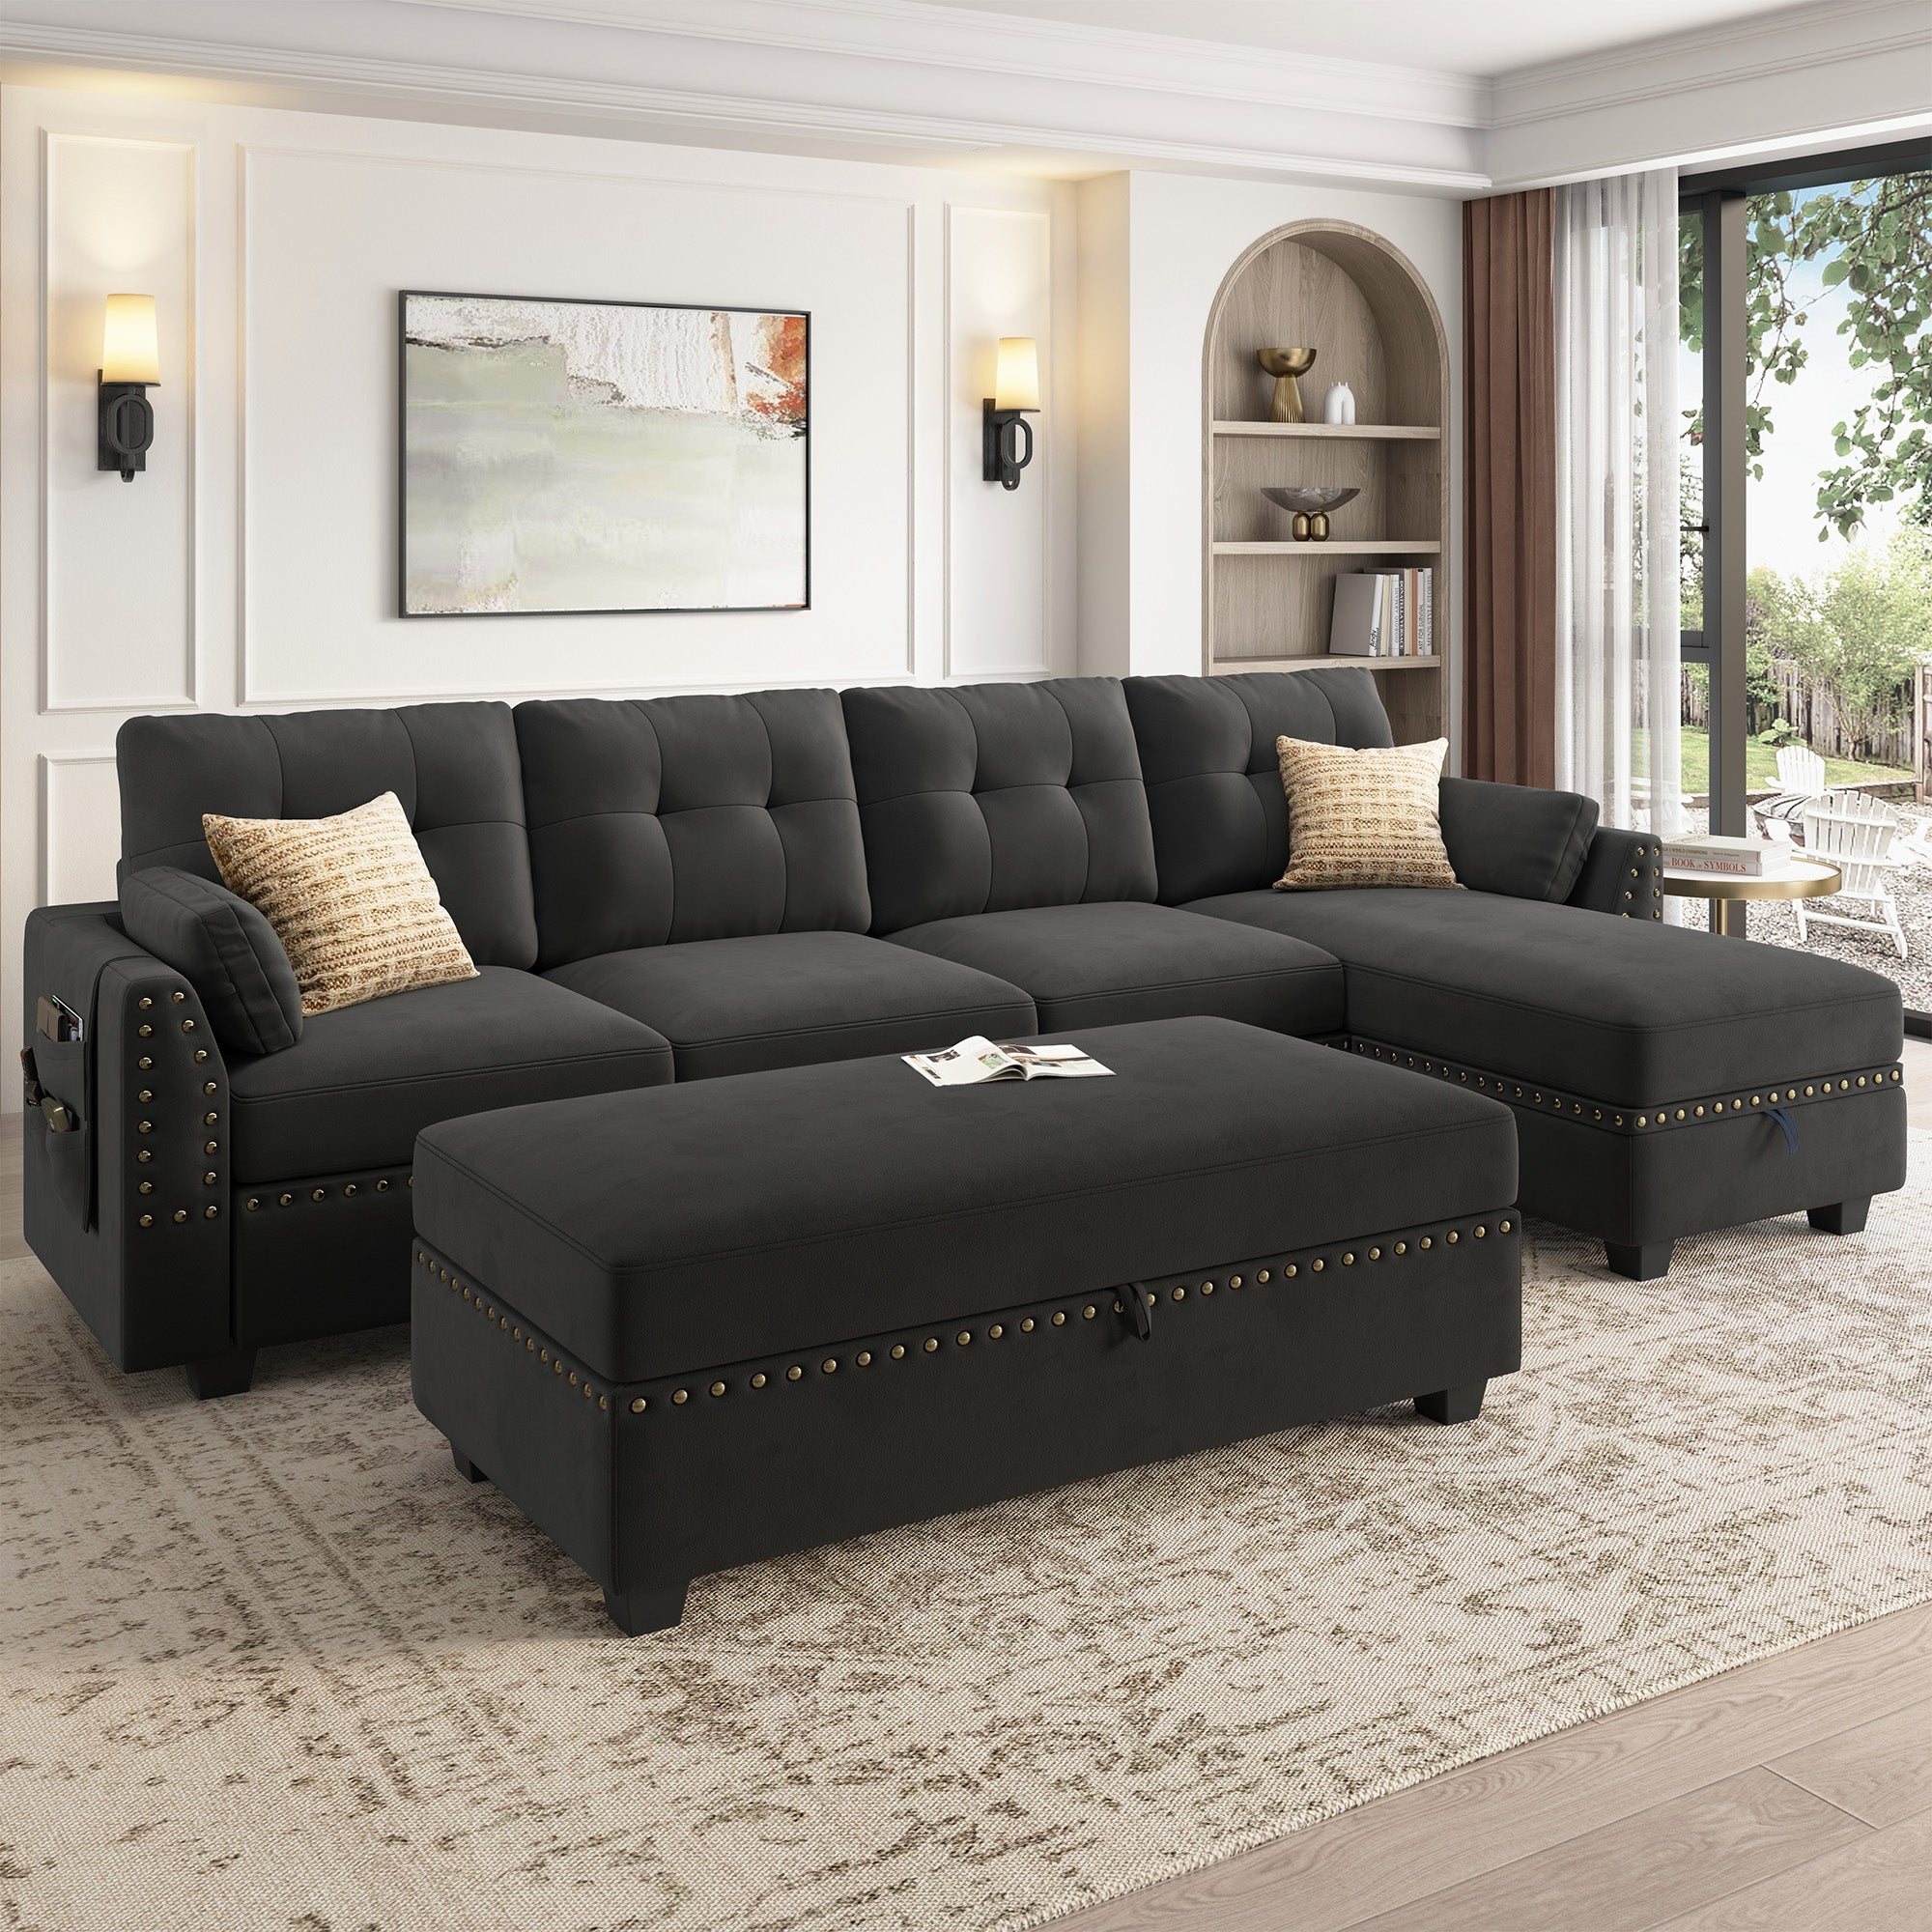 HONBAY Velvet 4-Seat L-Shaped Sectional Sofa with Storage Ottoman